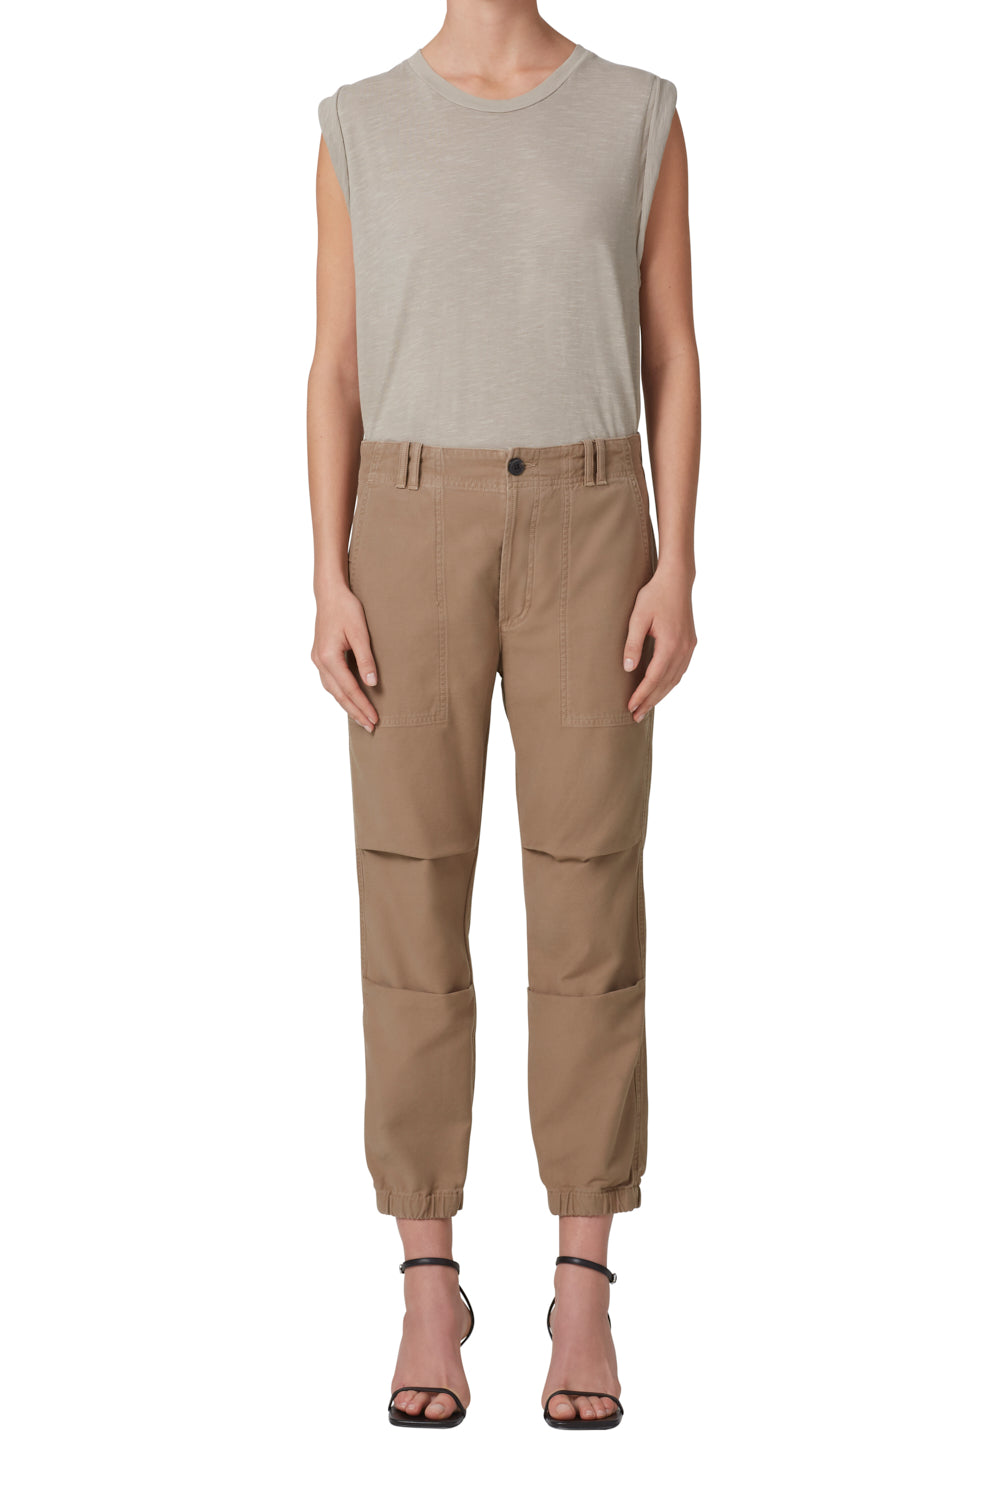 Citizens of Humanity - Agni Utility Trouser in Cocolette